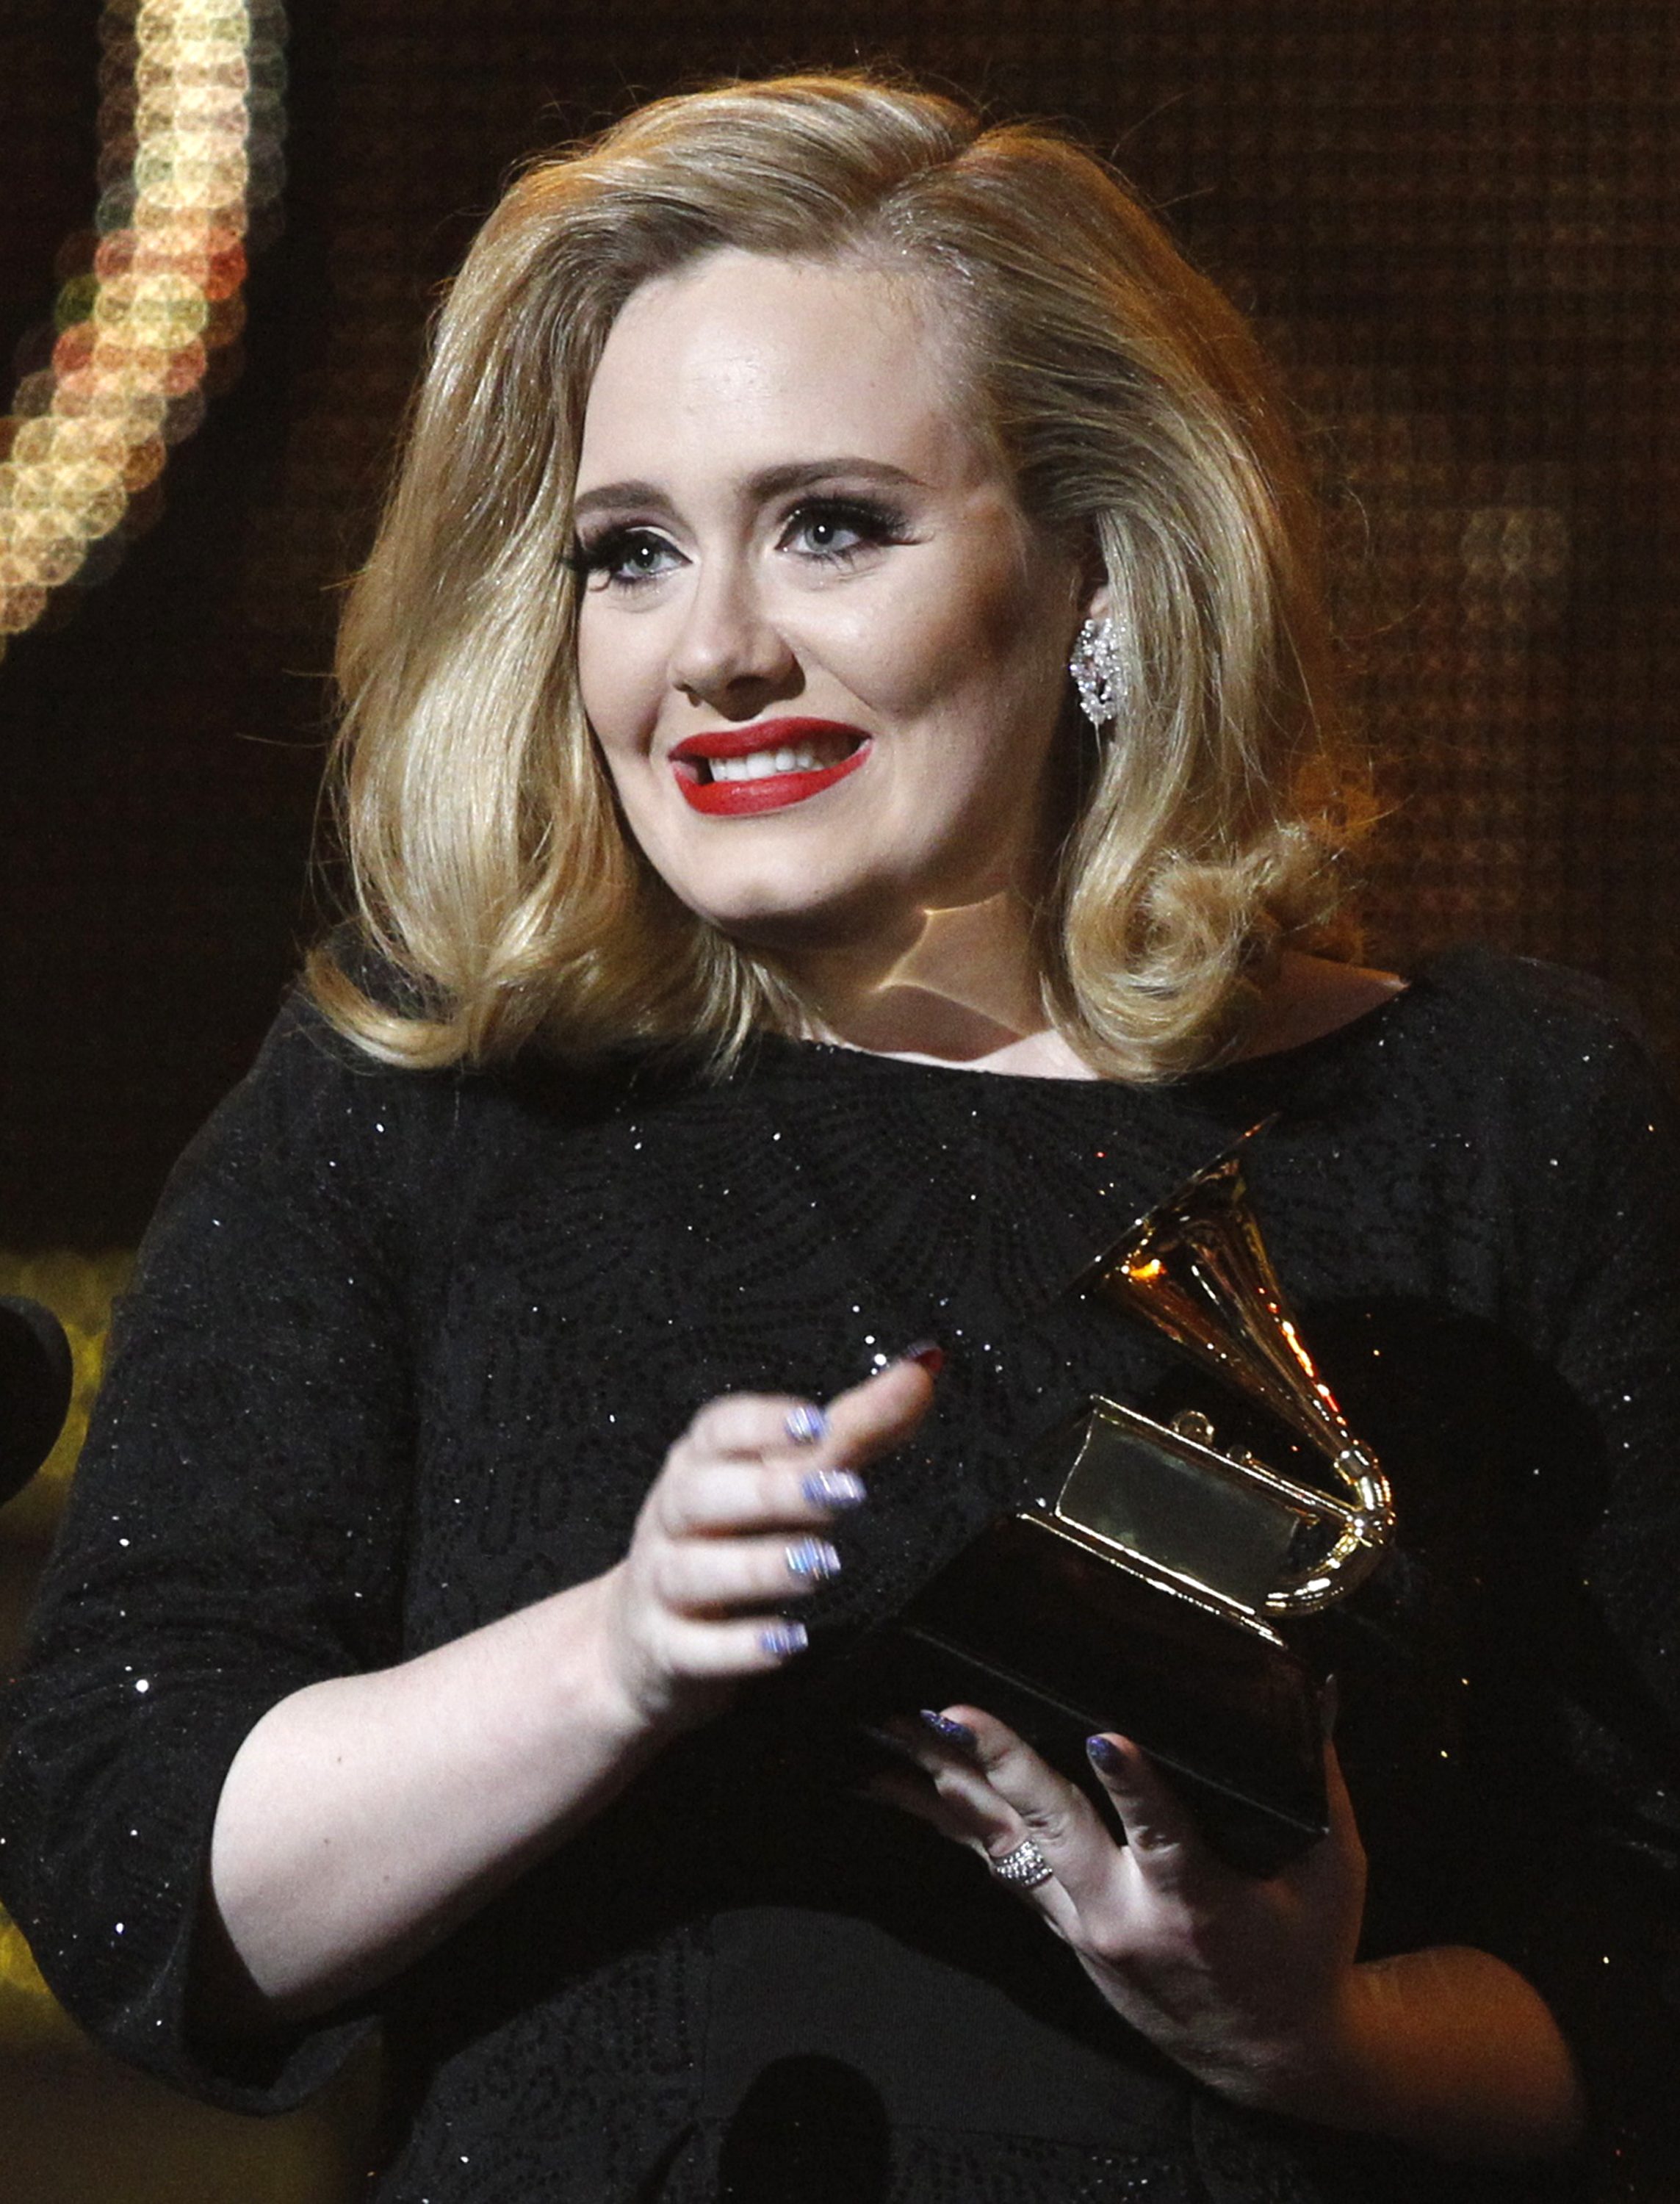 File photo of Singer Adele at the 54th annual Grammy Awards in Los Angeles